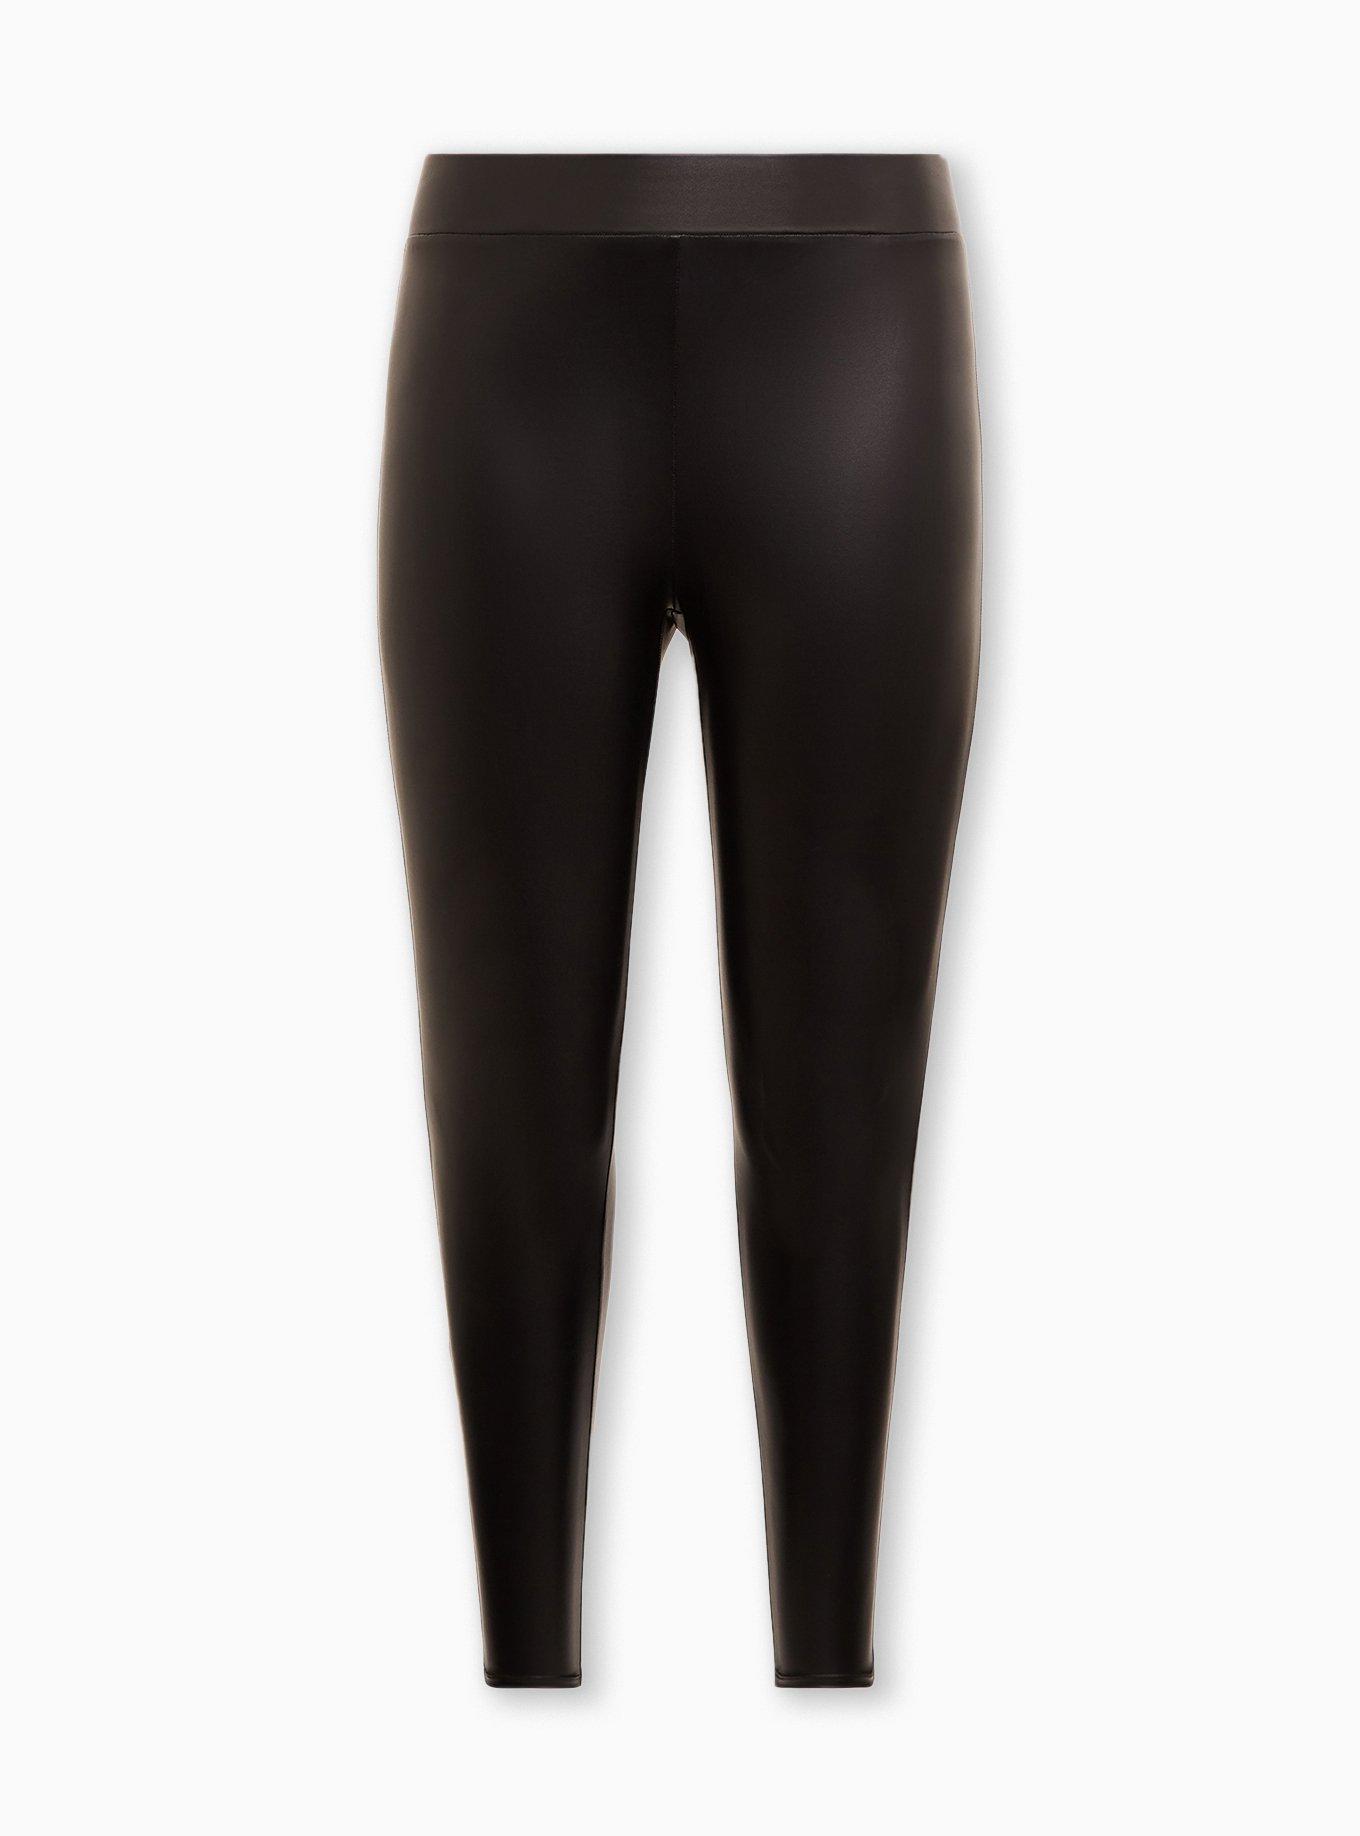  Black Mid Waist Faux Leather Pants Sexy Club Party